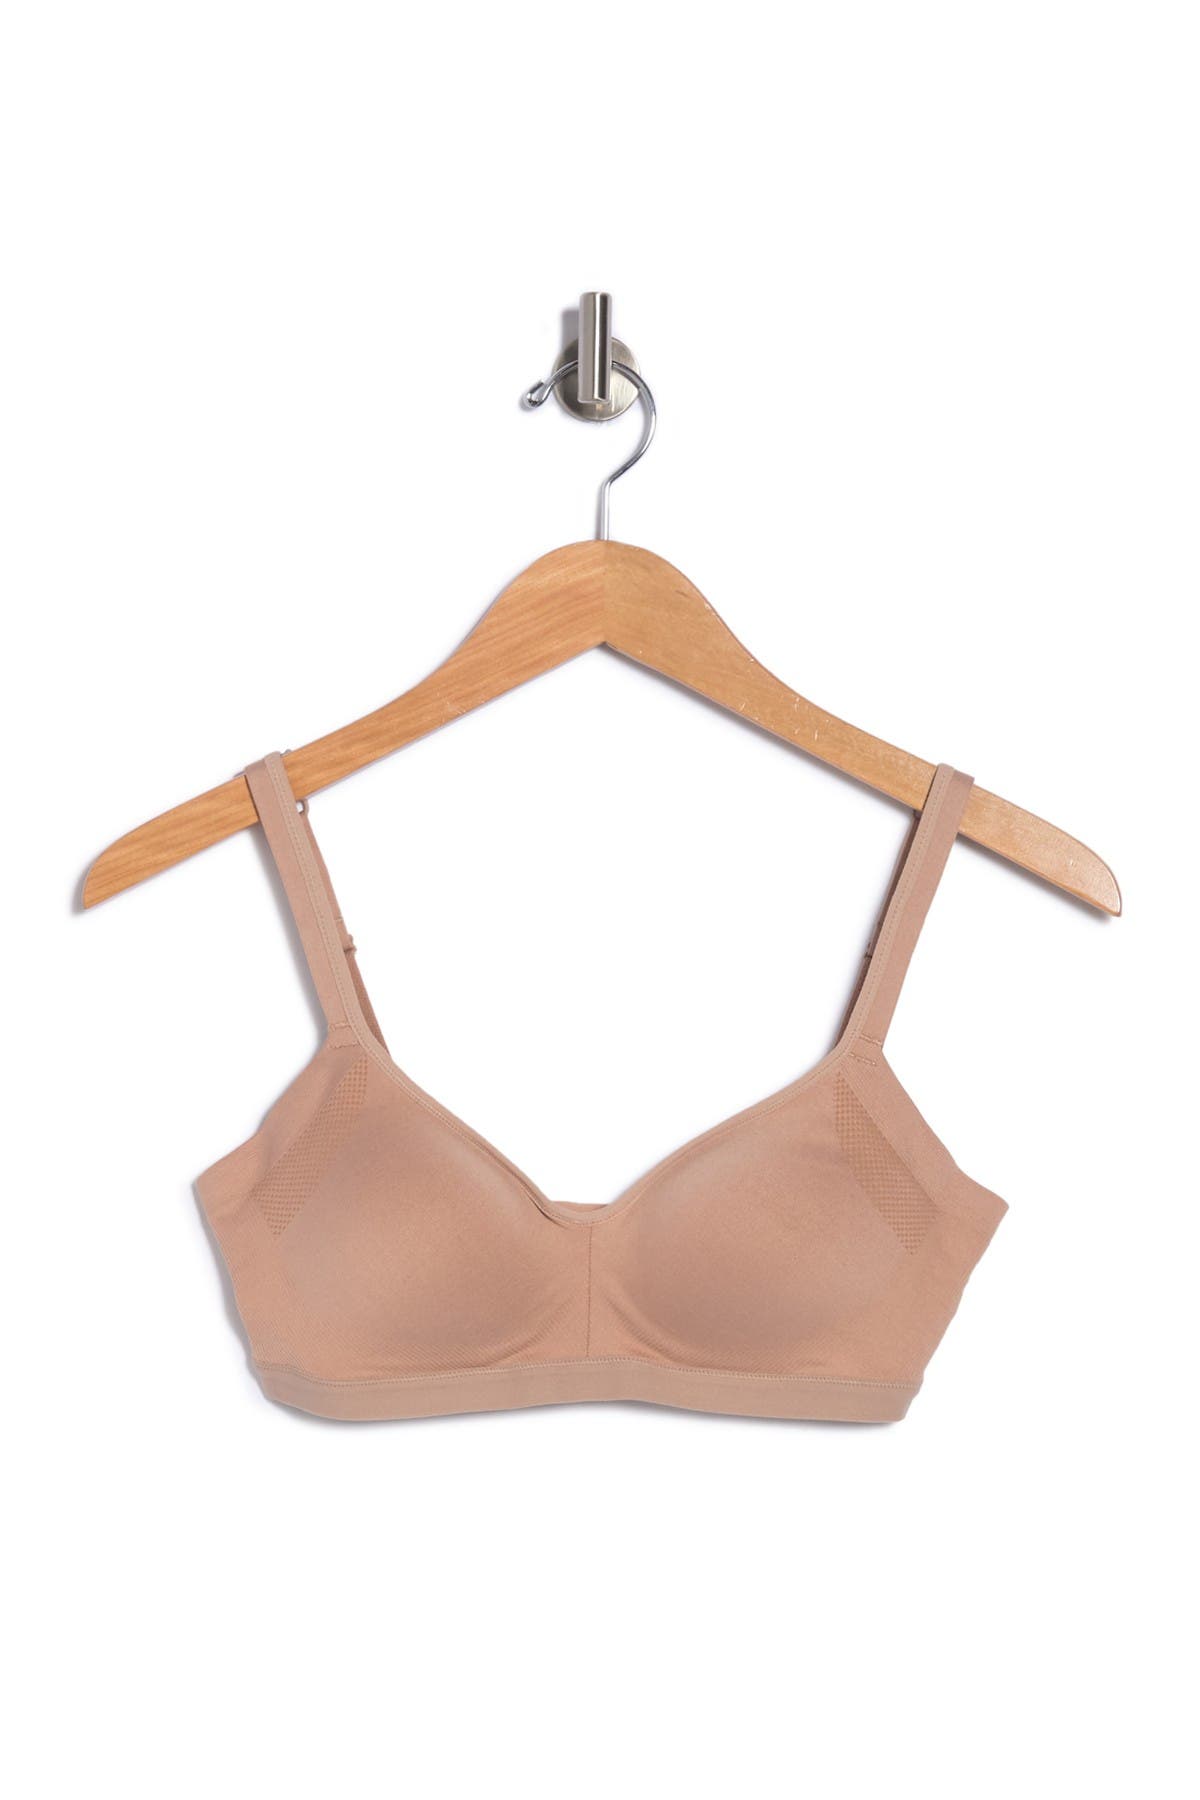 Warner's Easy Does It Wire Free Bra In Toasted Almond